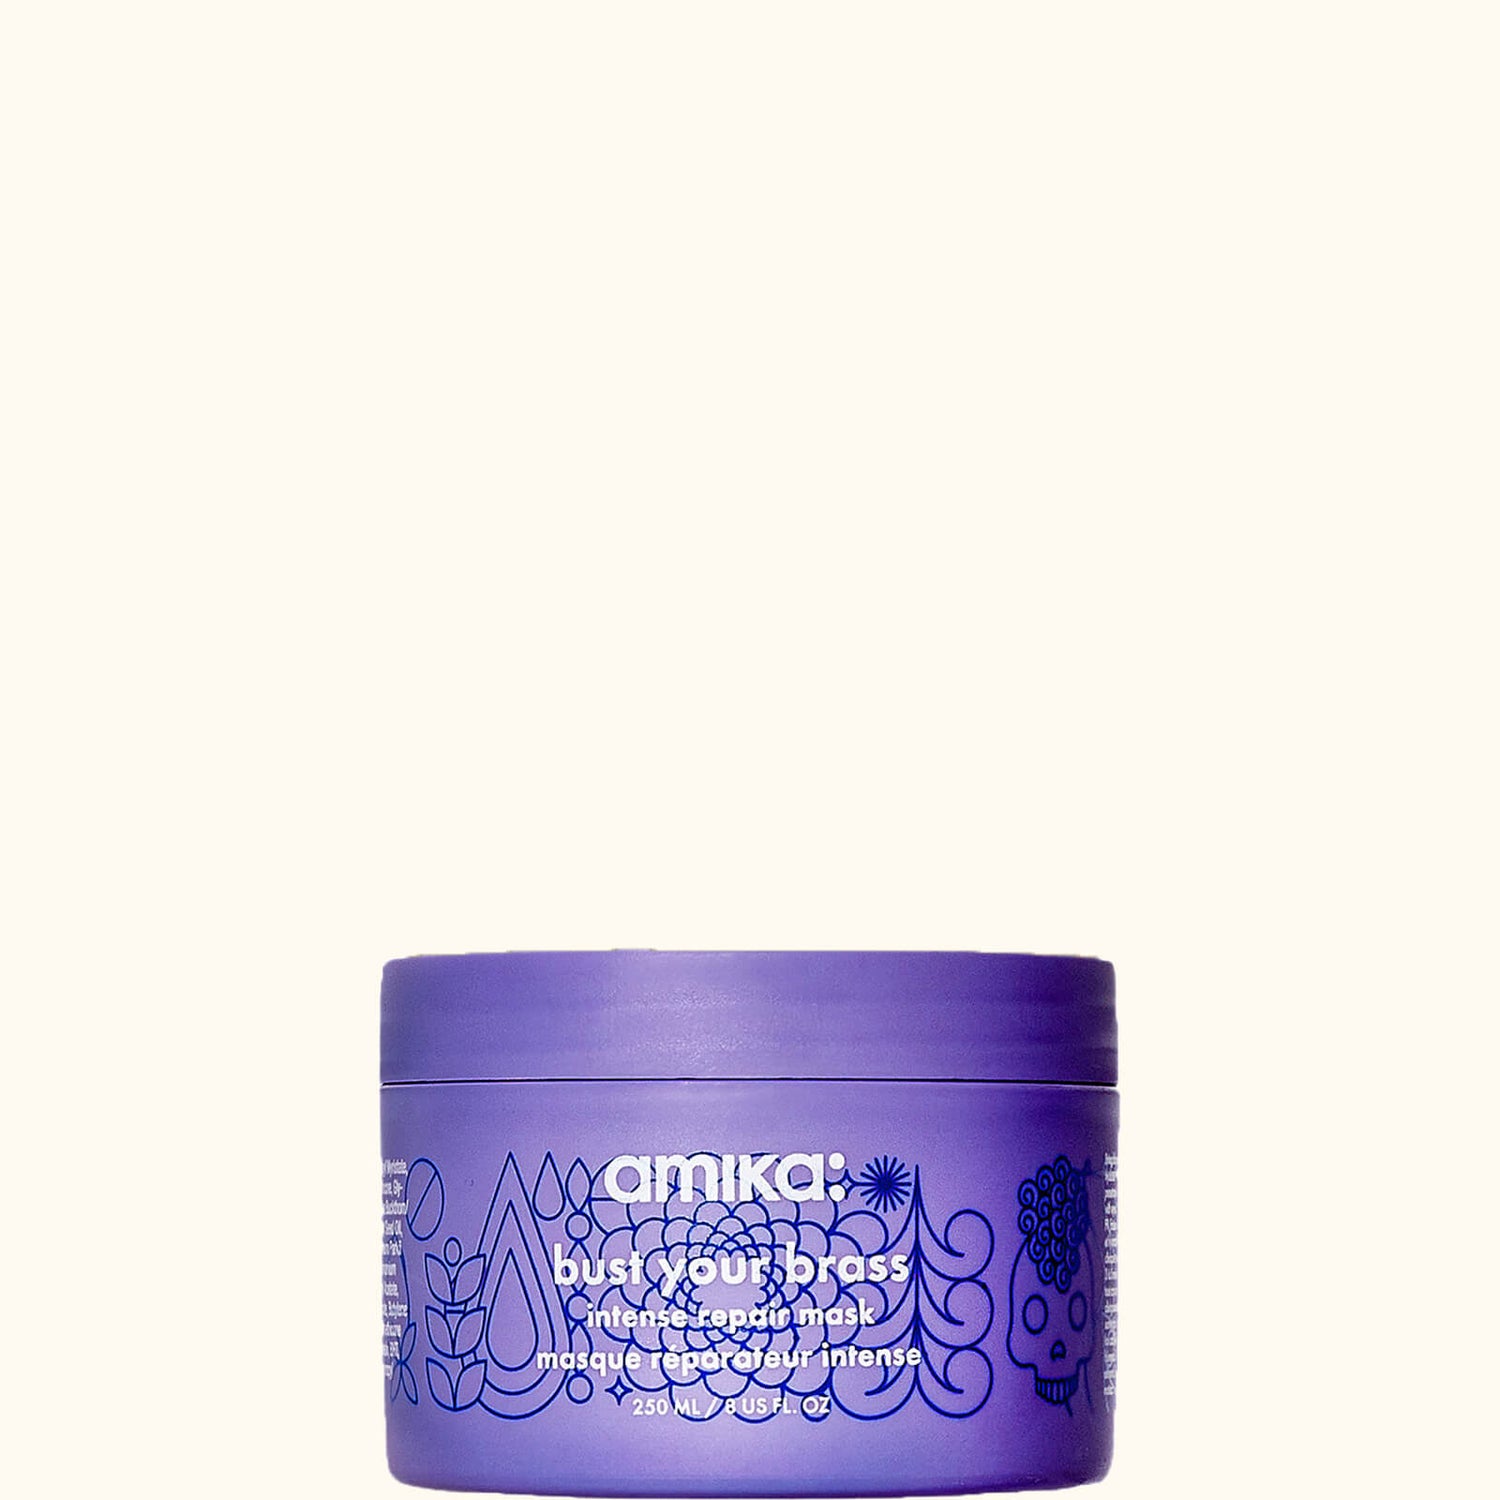 Amika Bust Your BrassCool Blonde Intense Repair Hair Mask